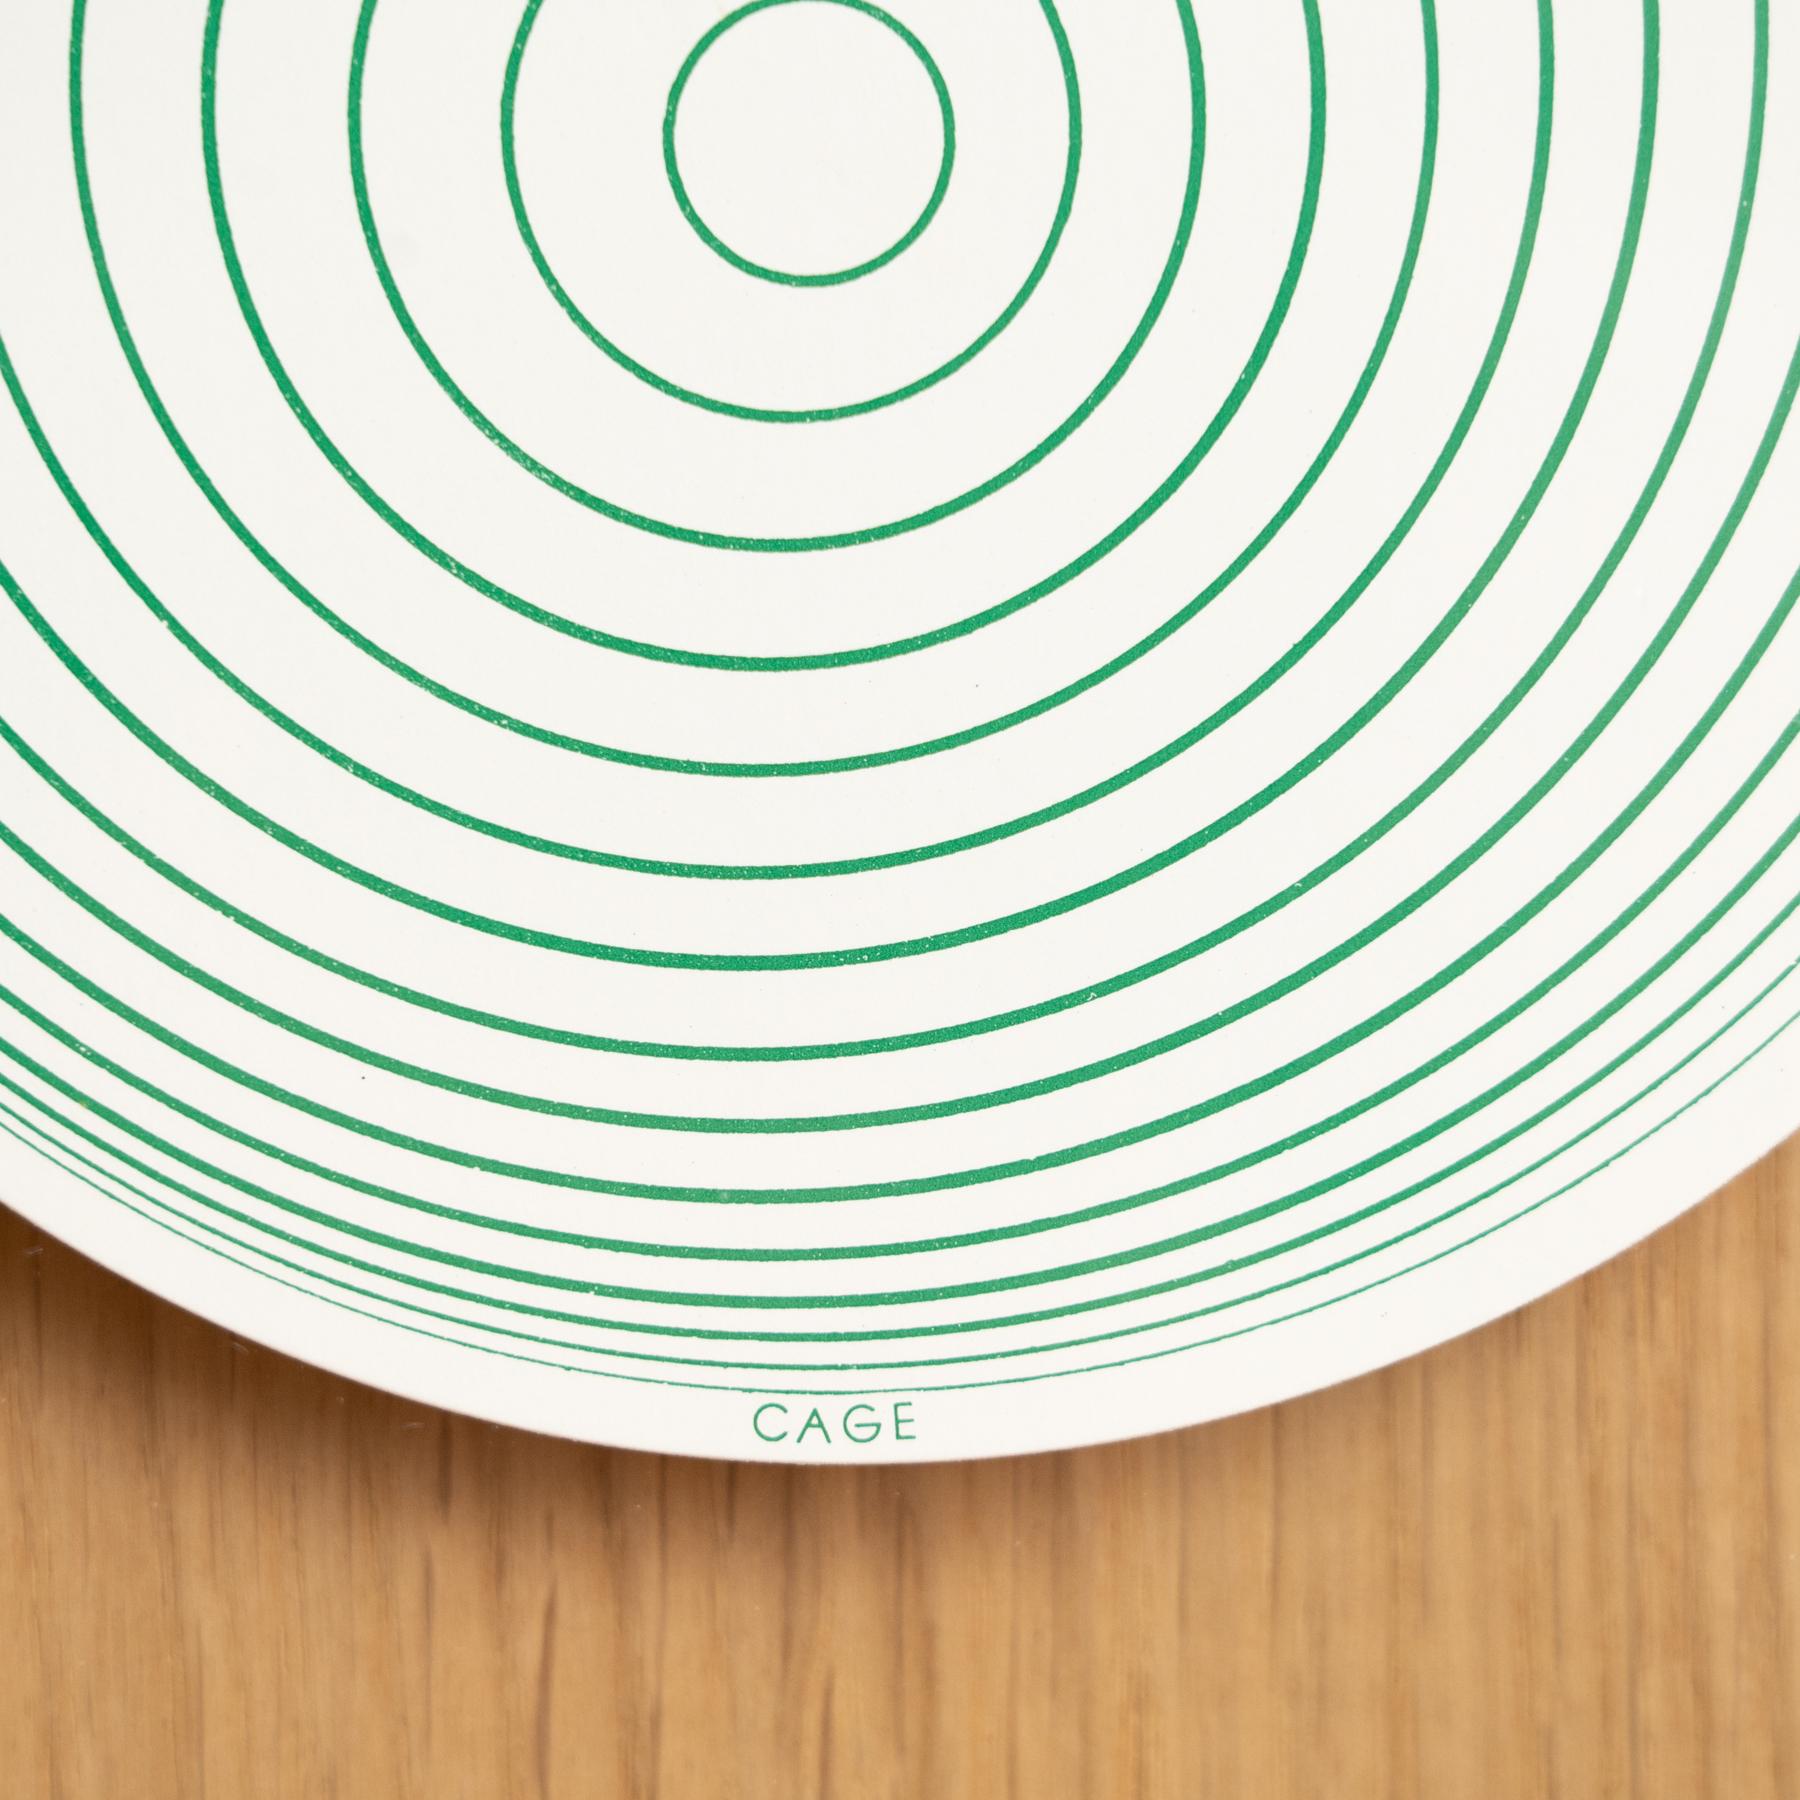 Paper Marcel Duchamp Green and White Cage Rotorelief by Konig Series 133, 1987 For Sale